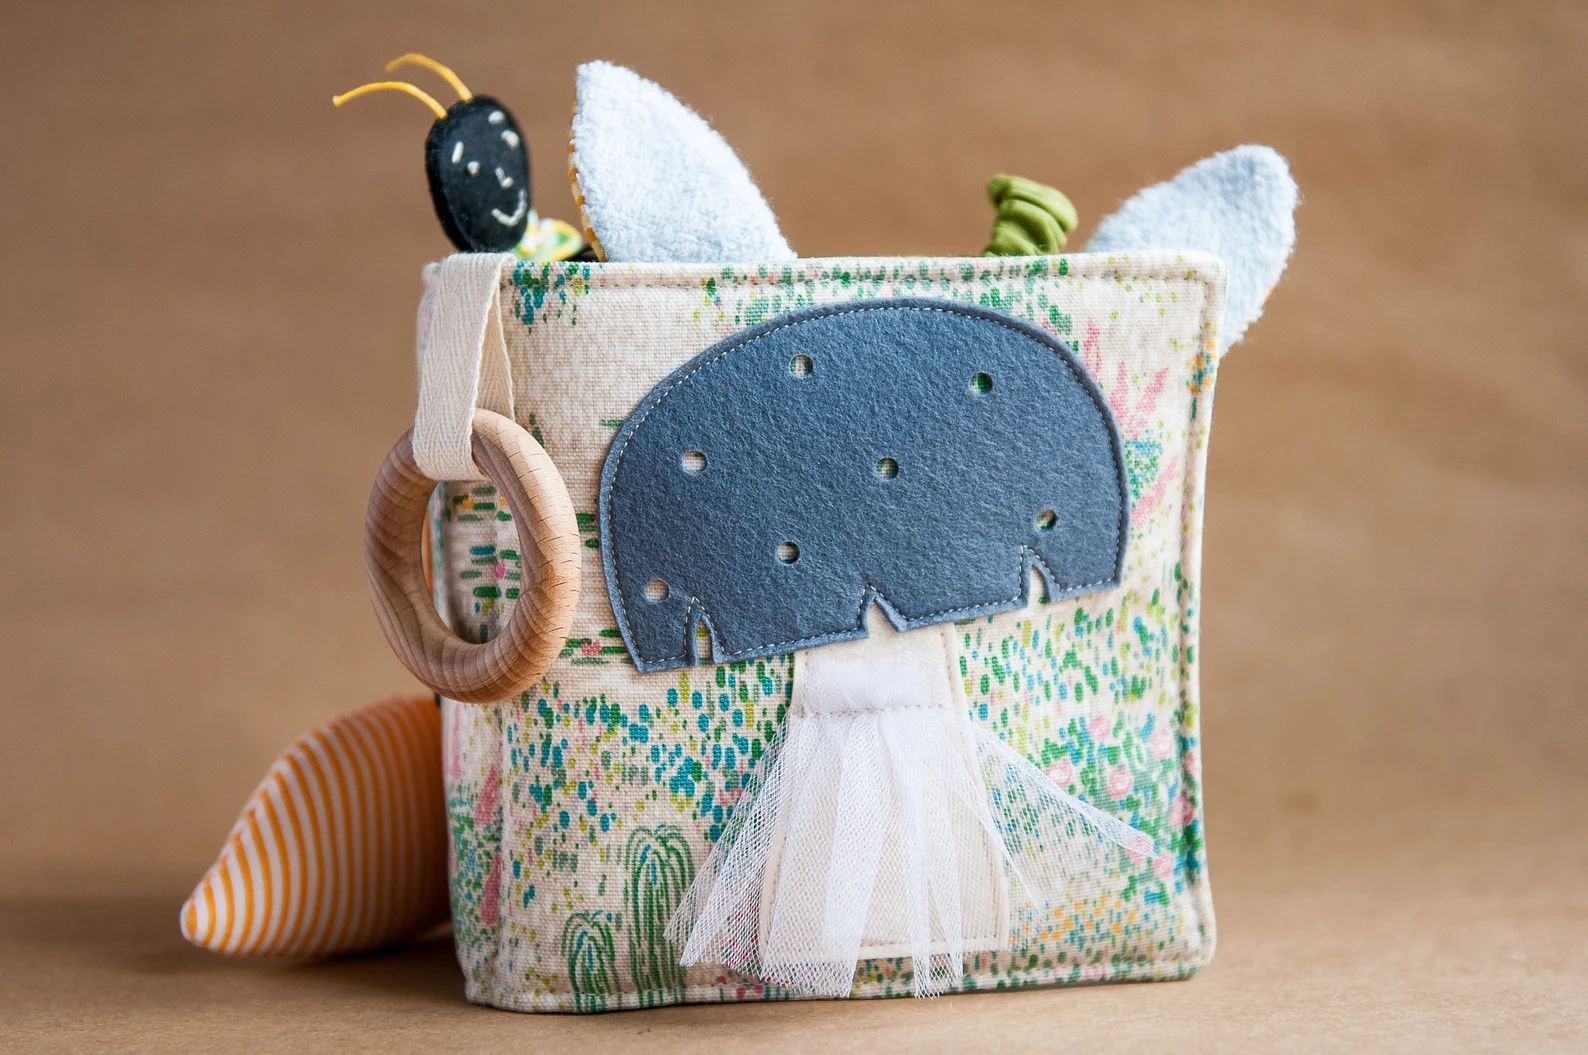 Gift for book lover: cloth book made out of felt and cotton, with sewn mushrooms and bugs.